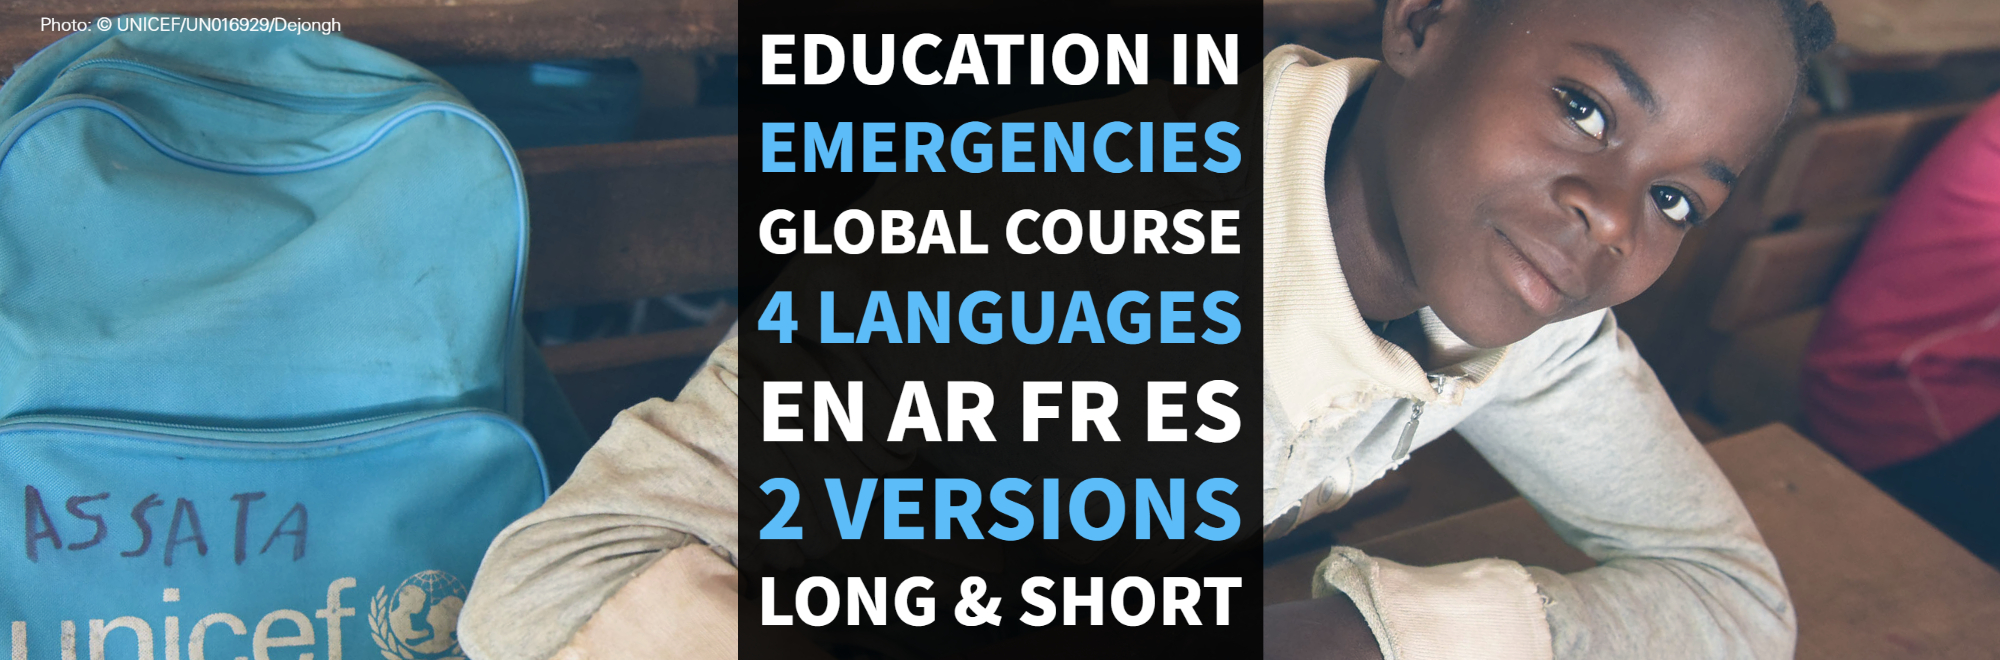 Banner Education in emergencies global Course available in 4 languages and 2 versions short and long